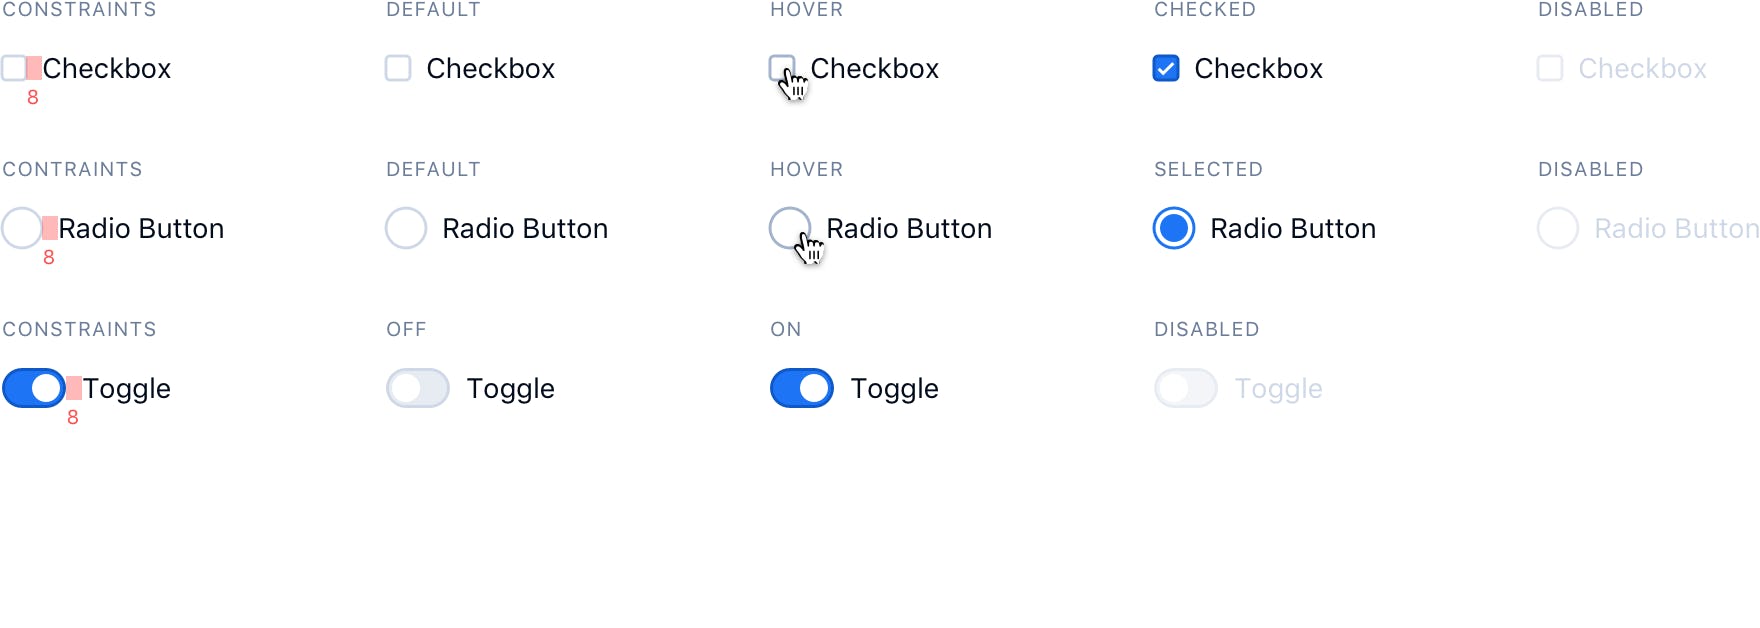 Rocket.Chat Checkboxes and Radio Buttons